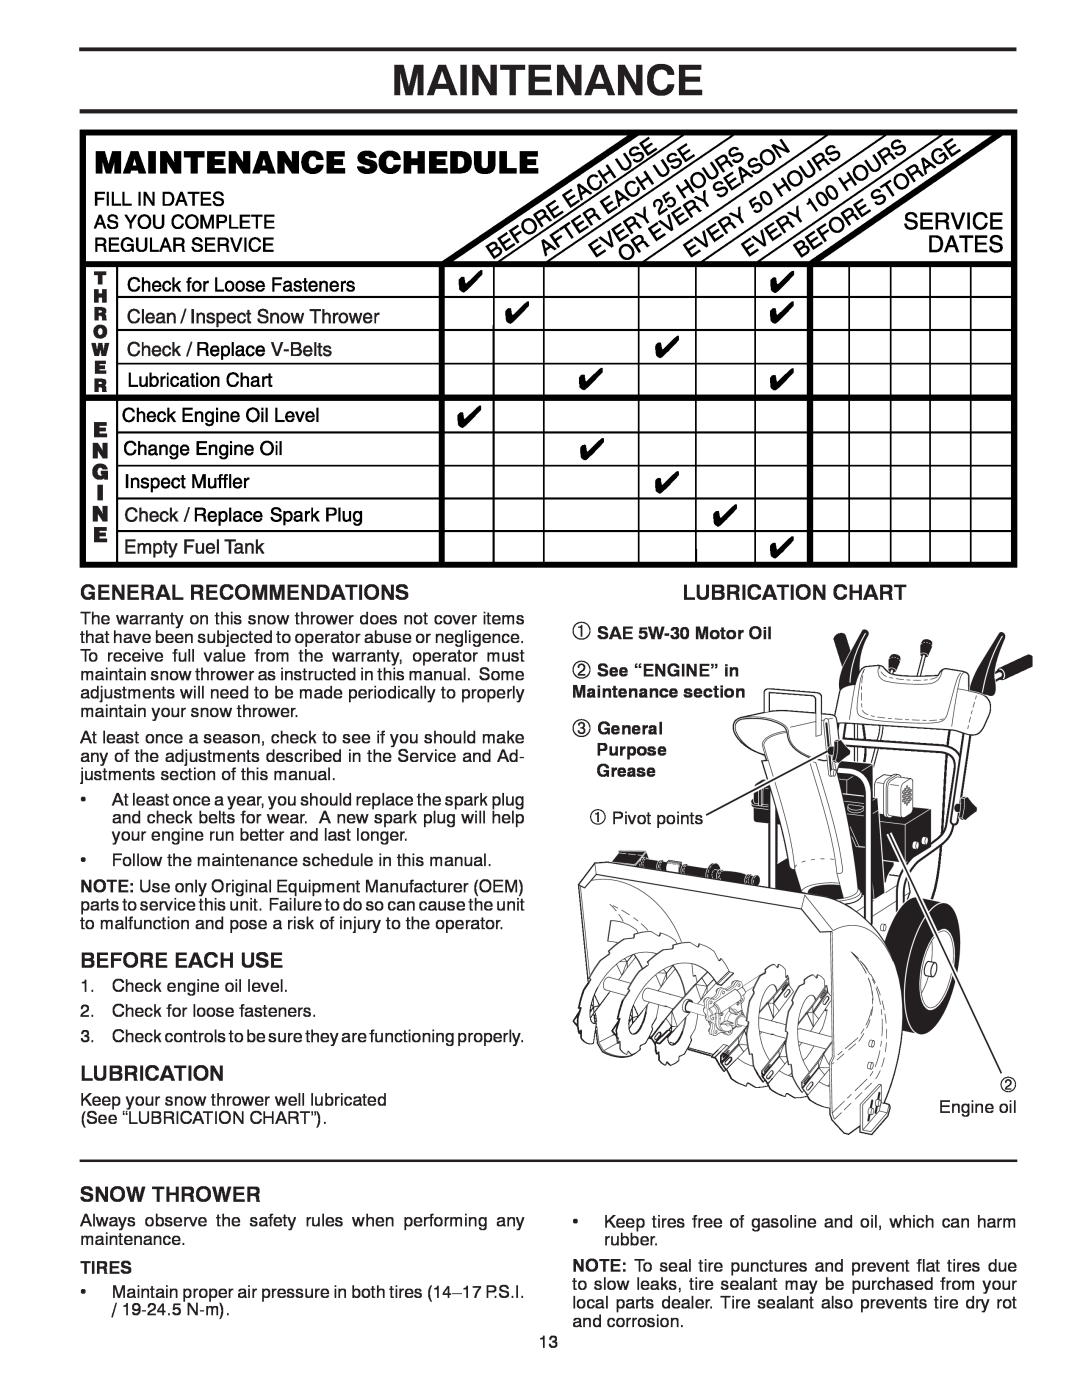 Poulan 421602 Maintenance, General Recommendations, Before Each Use, Snow Thrower, Lubrication Chart, Purpose Grease 